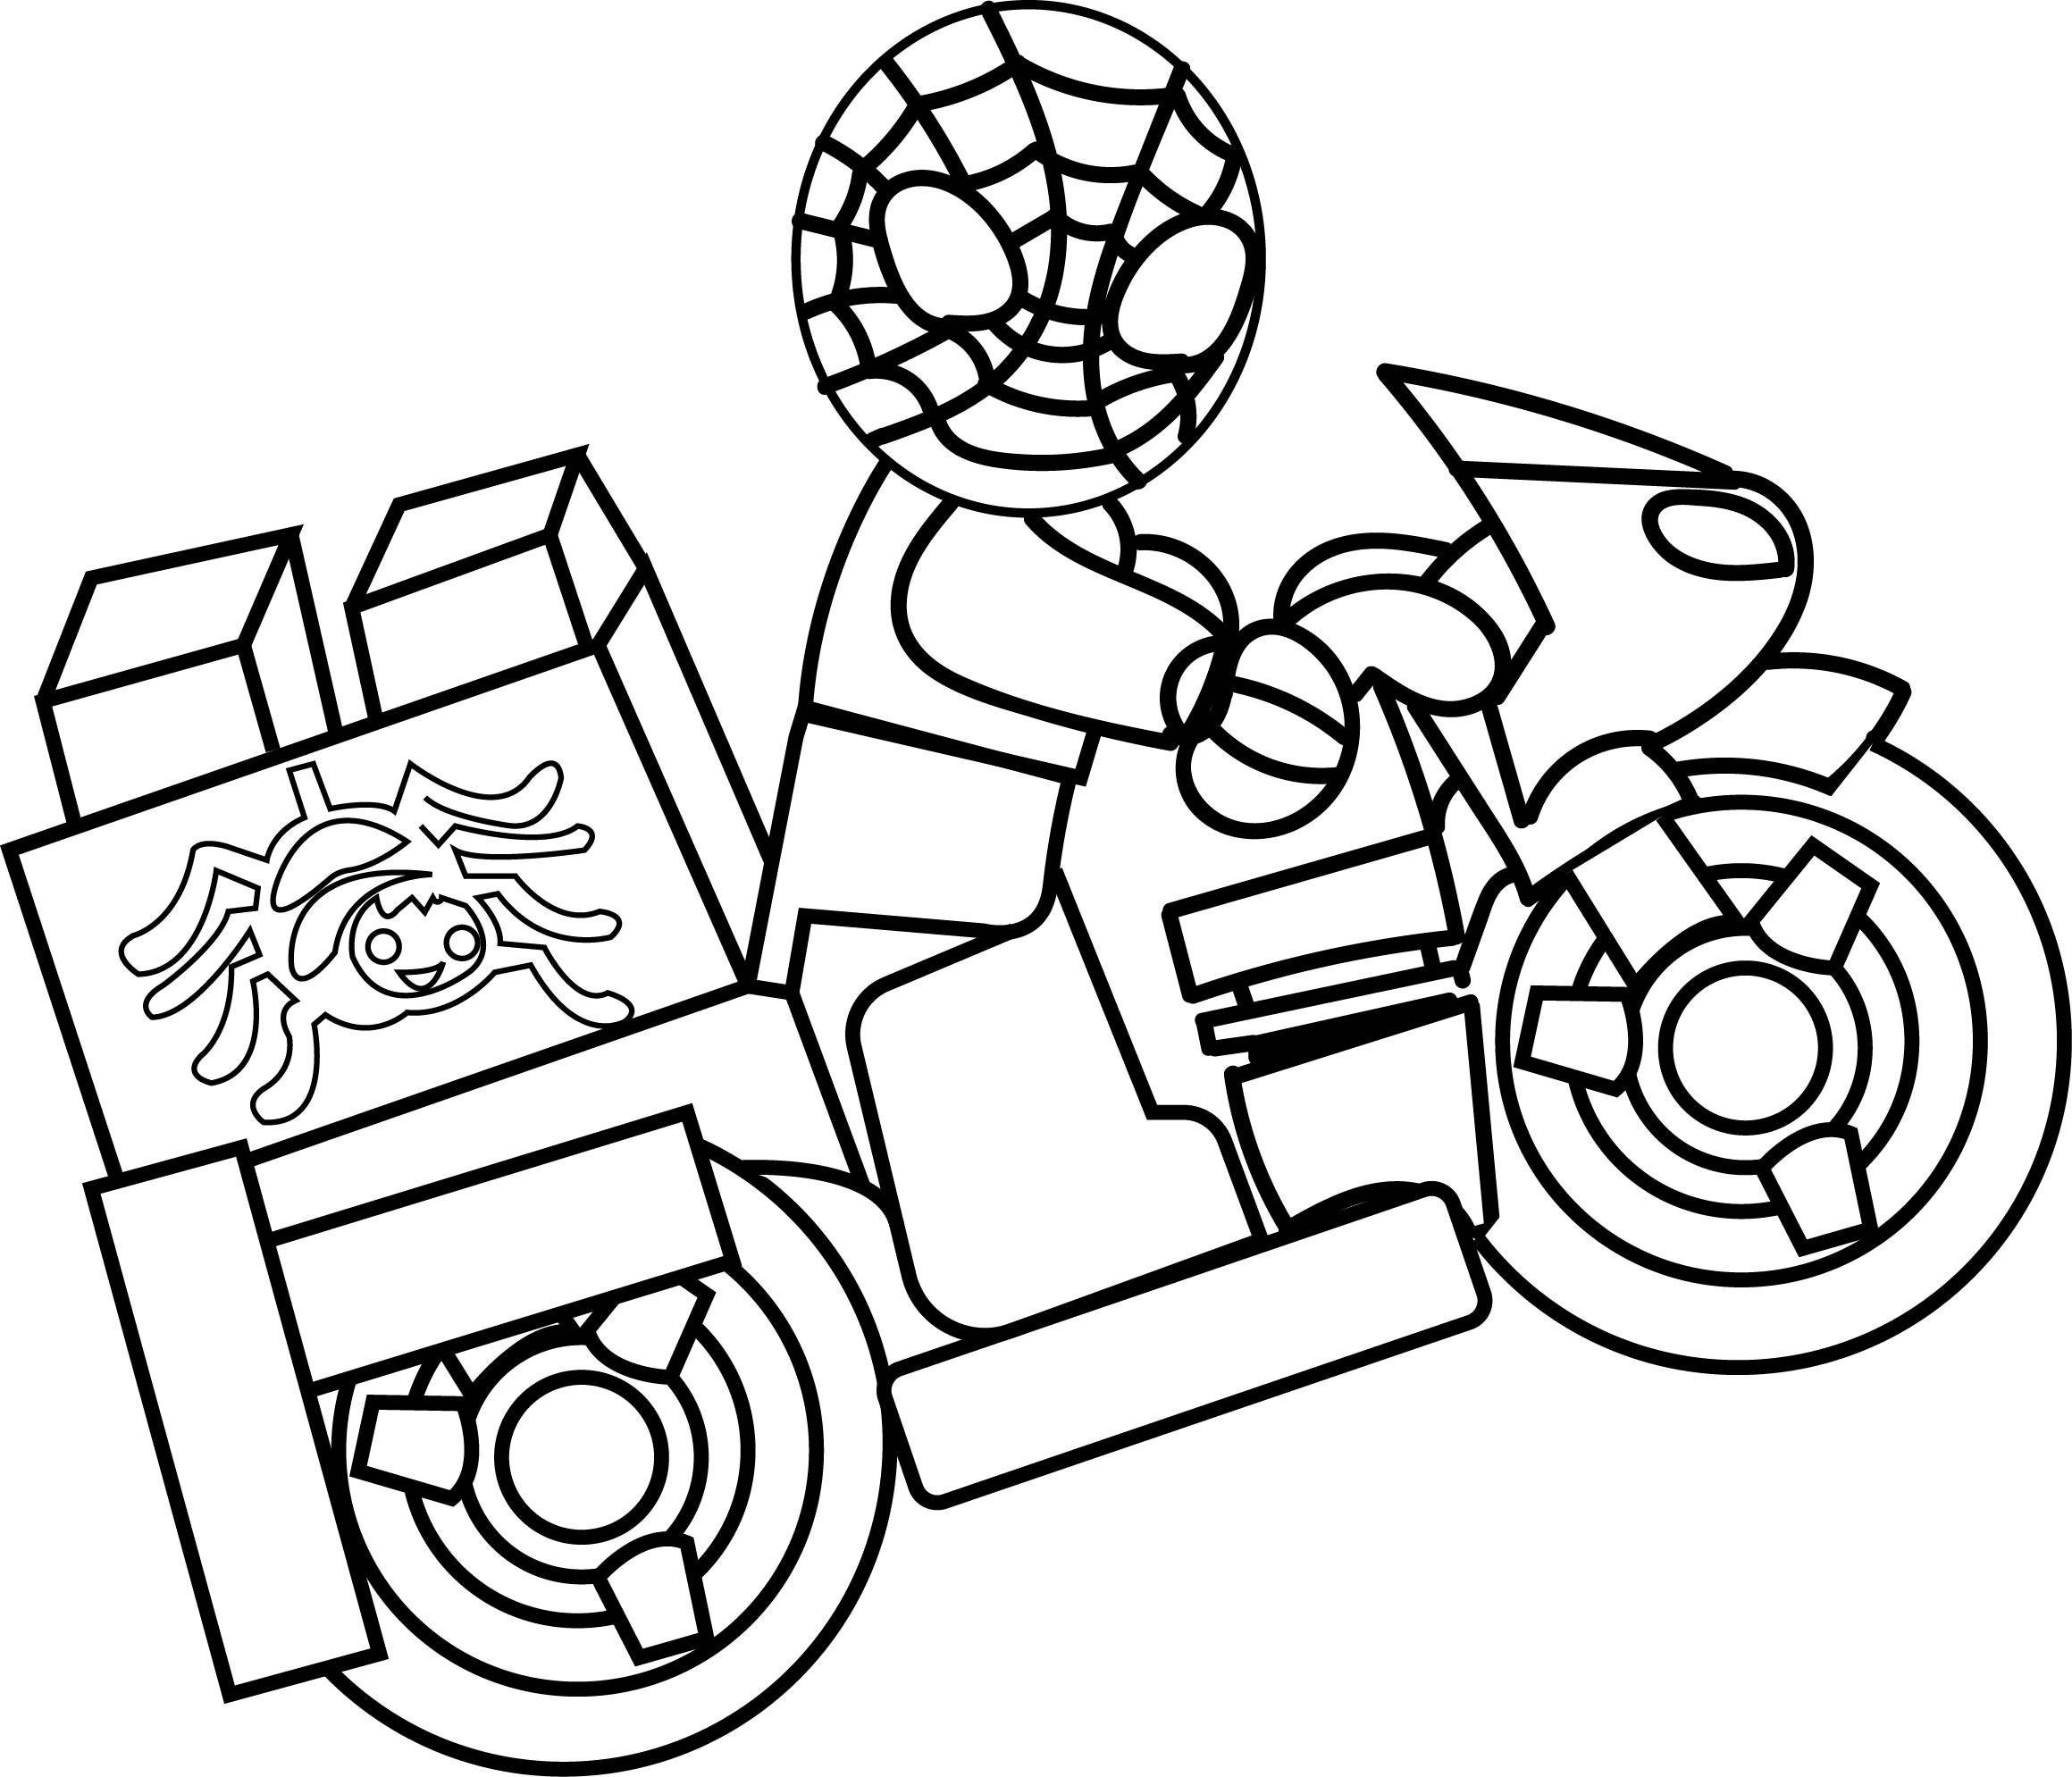 Spiderman Lego Coloring Pages
 Lego Spiderman Coloring Pages coloringsuite